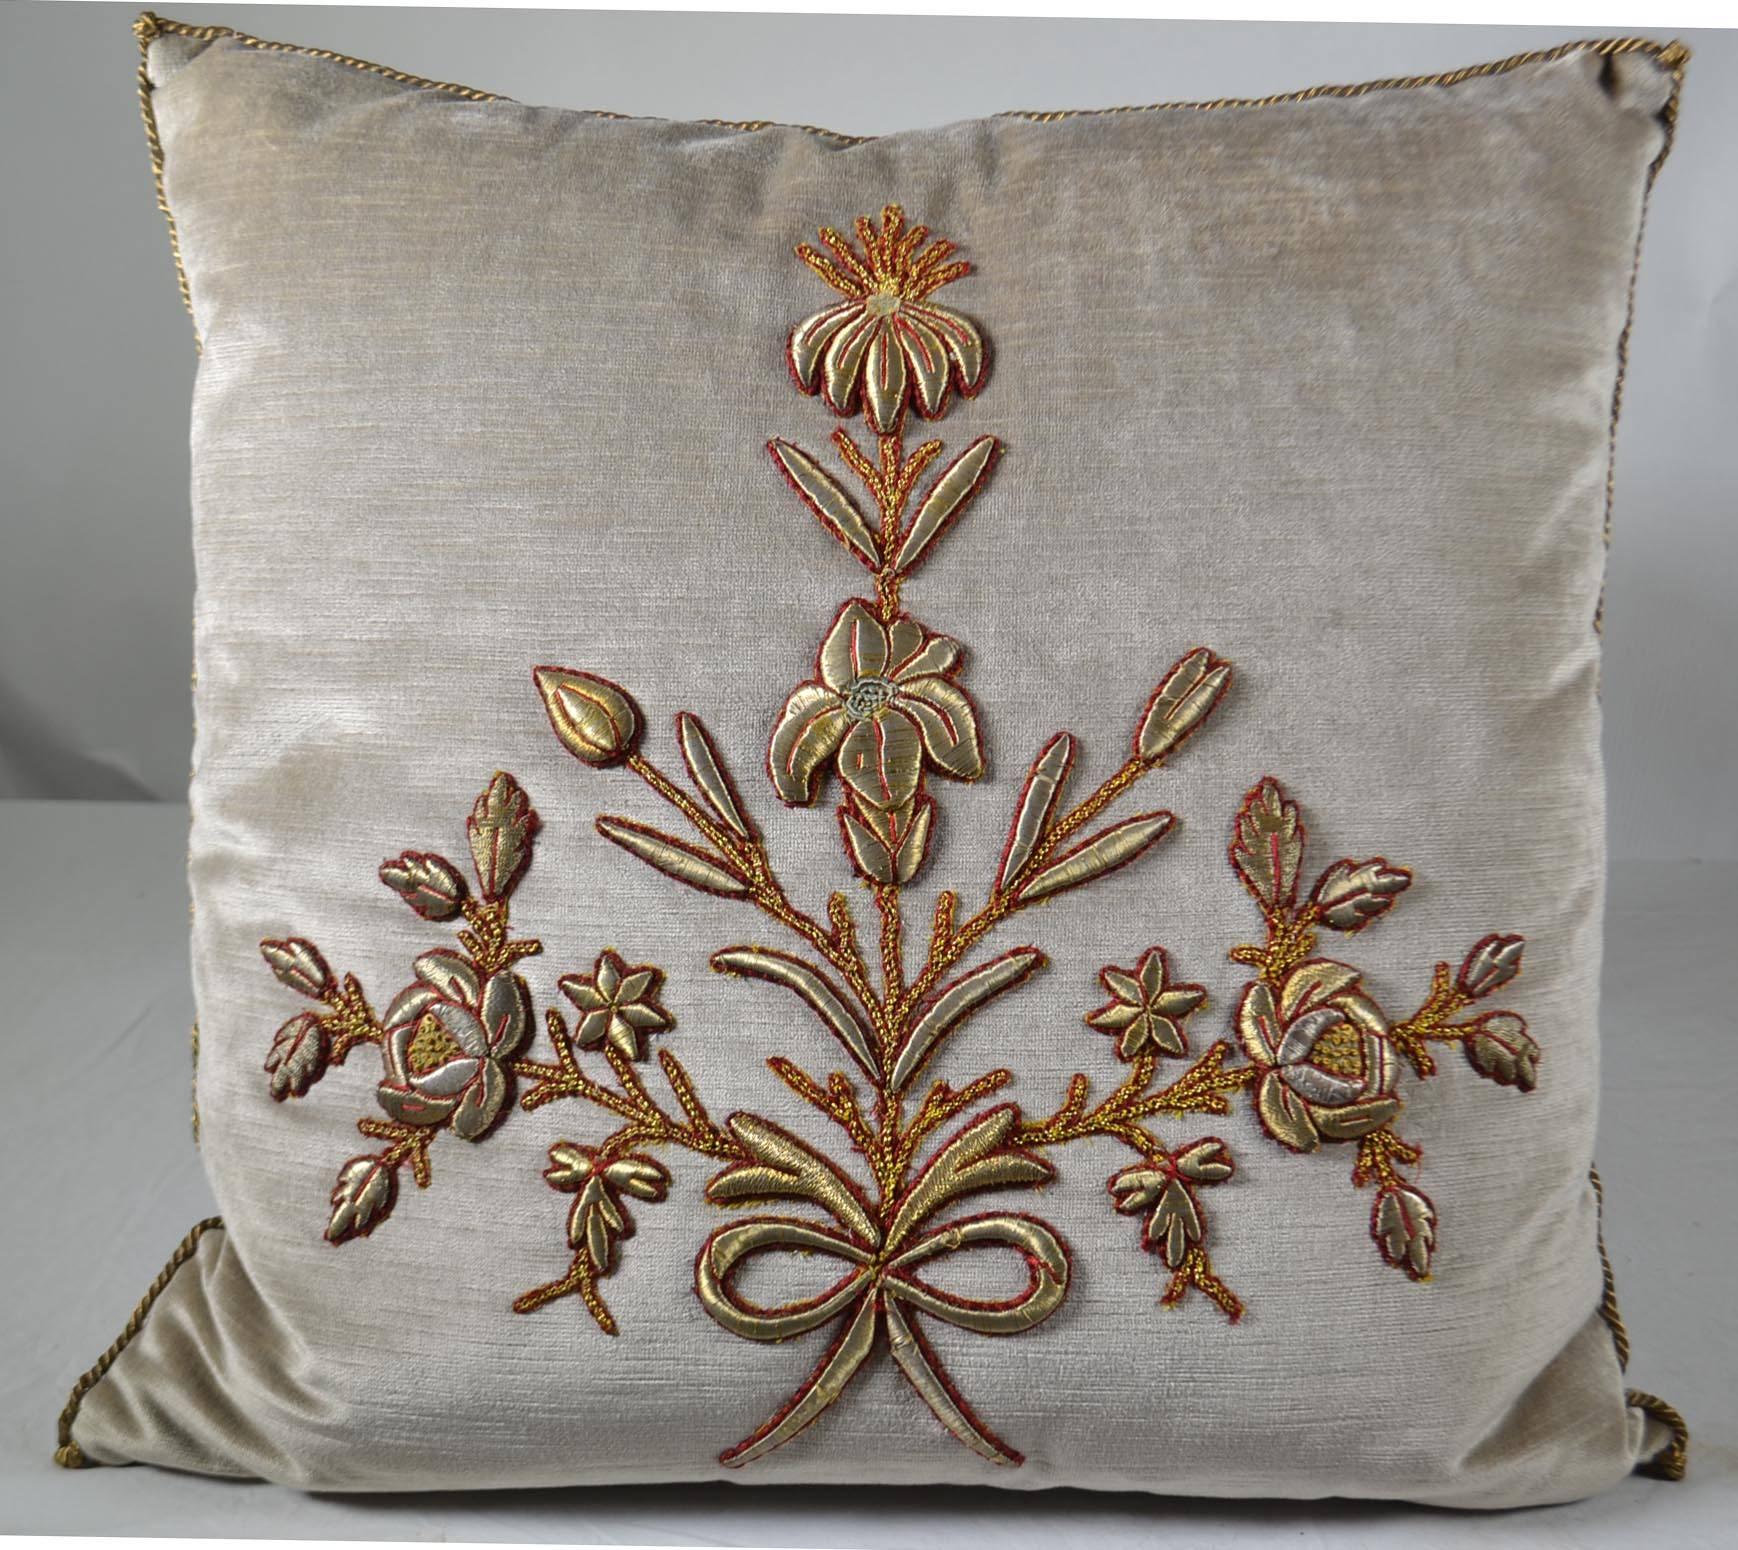 Pair of antique European raised gold metallic embroidery, couched with red silk thread on silver velvet. Hand-trimmed with gold metallic cording knotted in the corners, down filled.